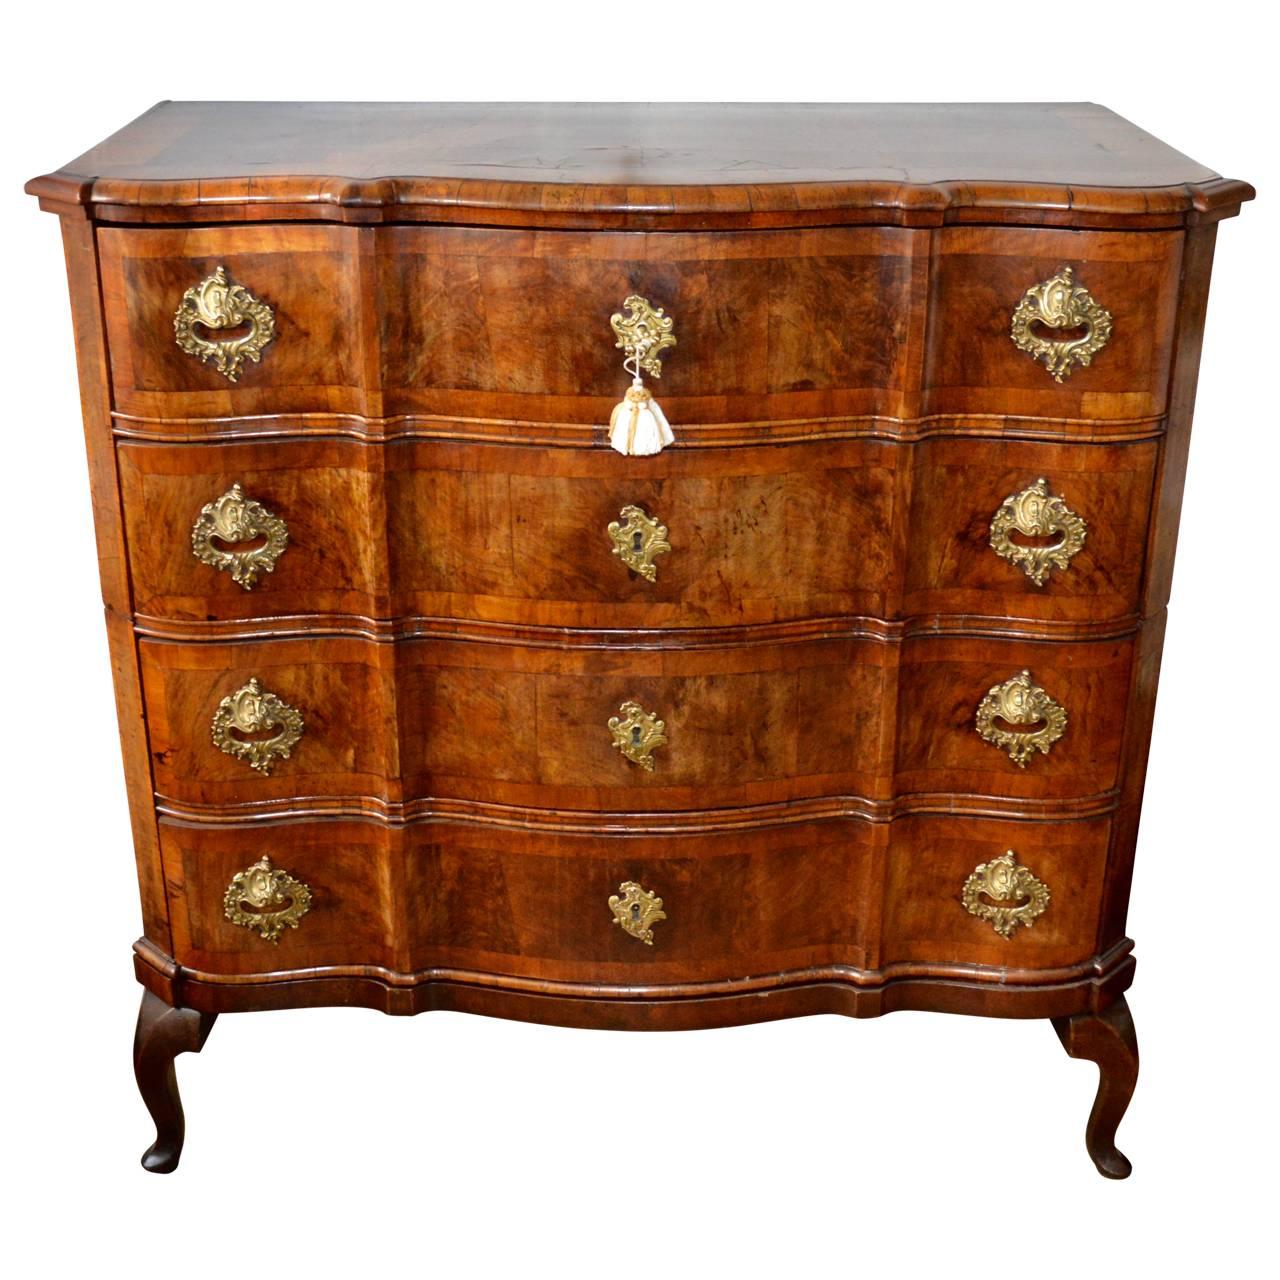 Beautiful Baroque mahogany chest of drawers with four large drawers and bronze hardware, circa 1740-1750, Copenhagen Denmark.